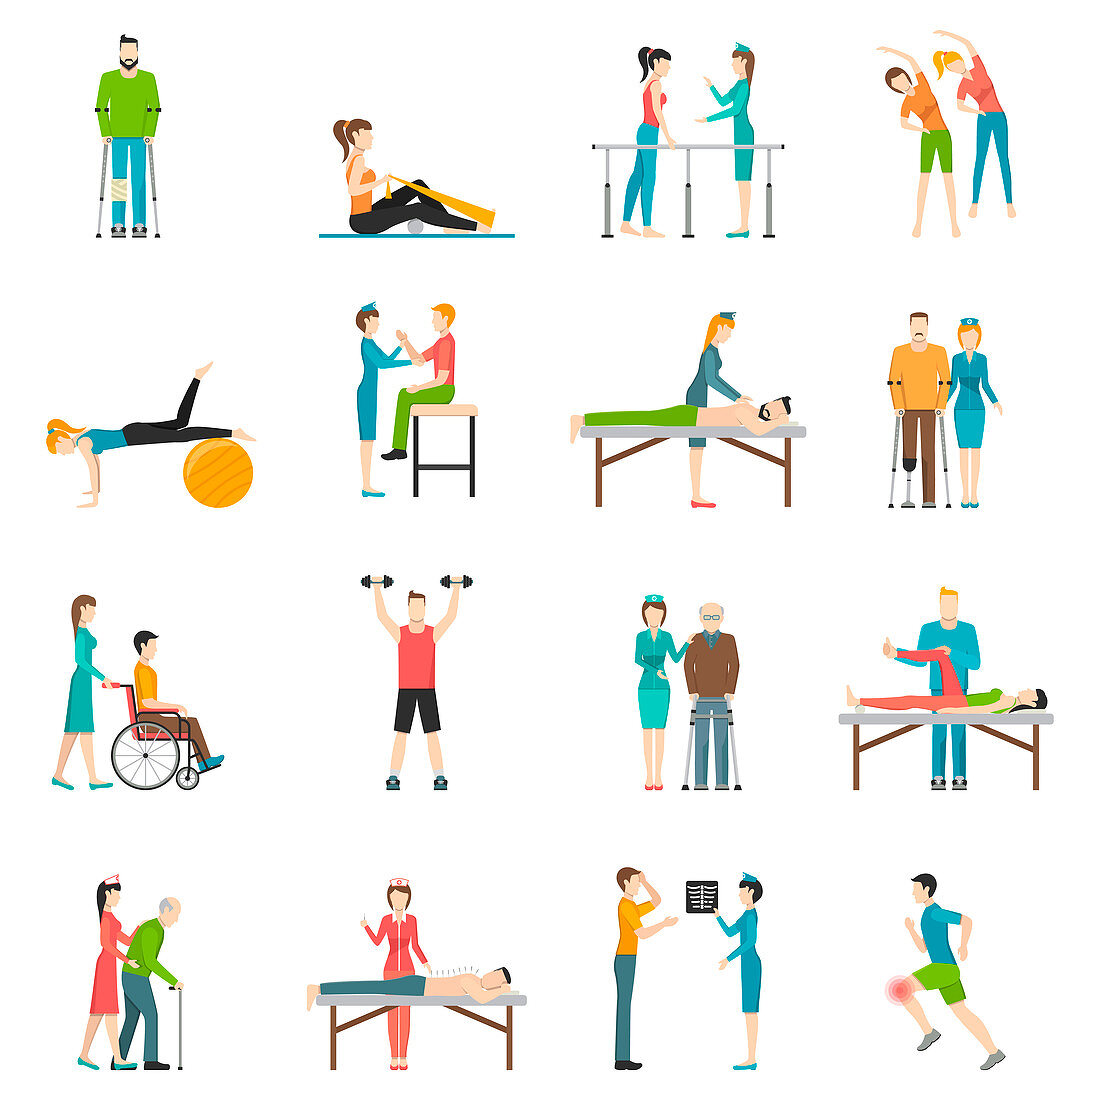 Physiotherapy icons, illustration